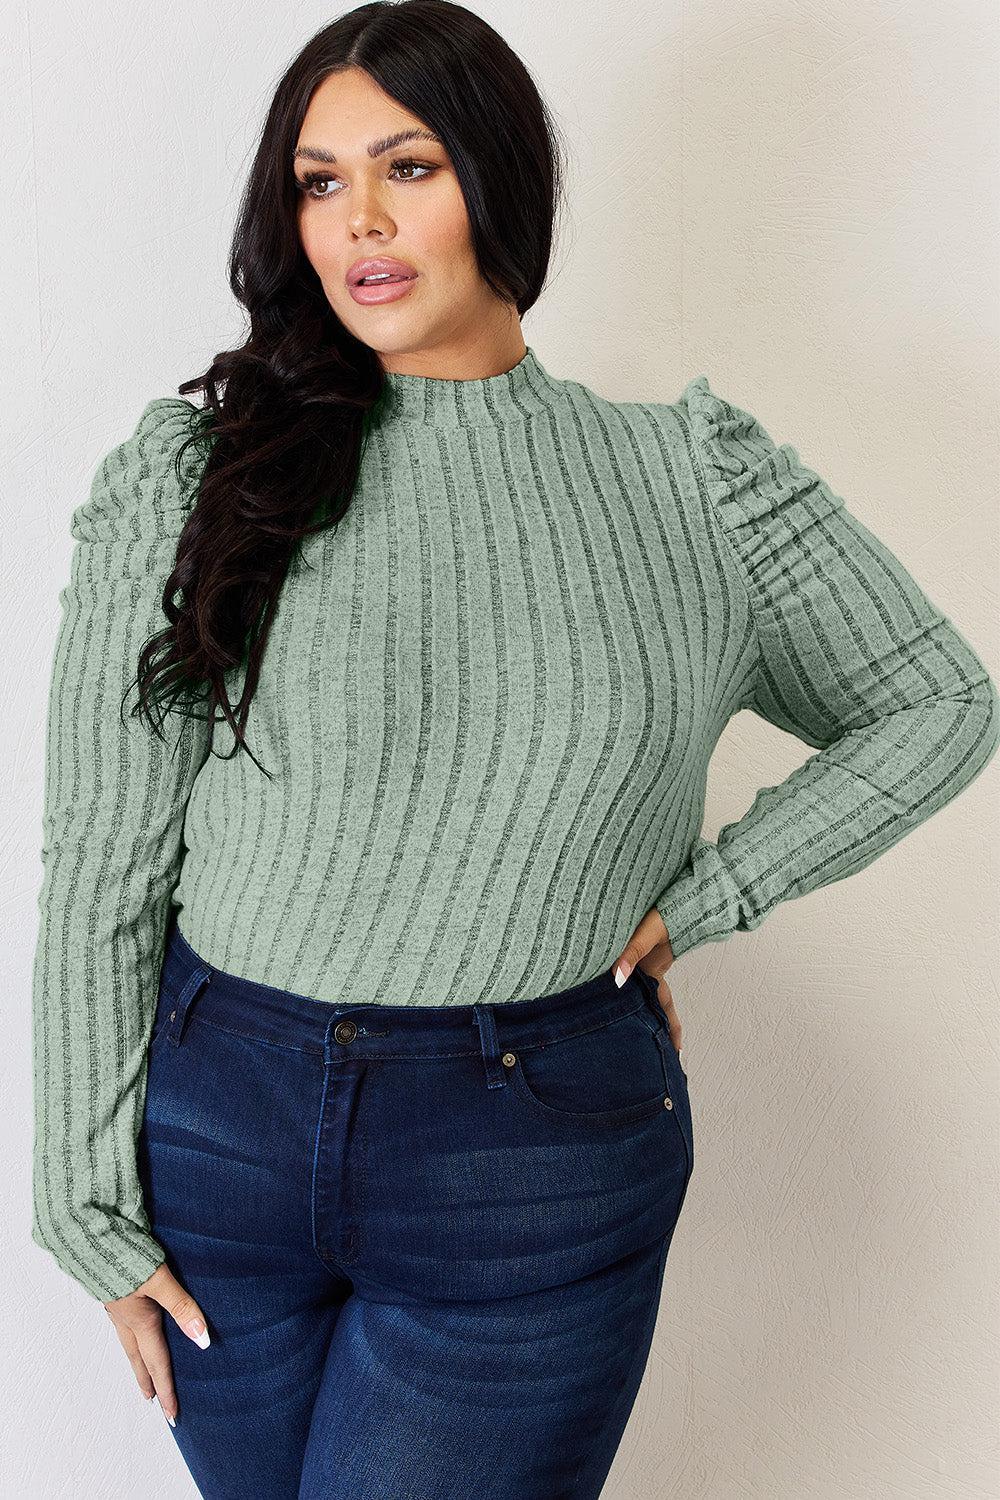 a woman in a green sweater poses for a picture